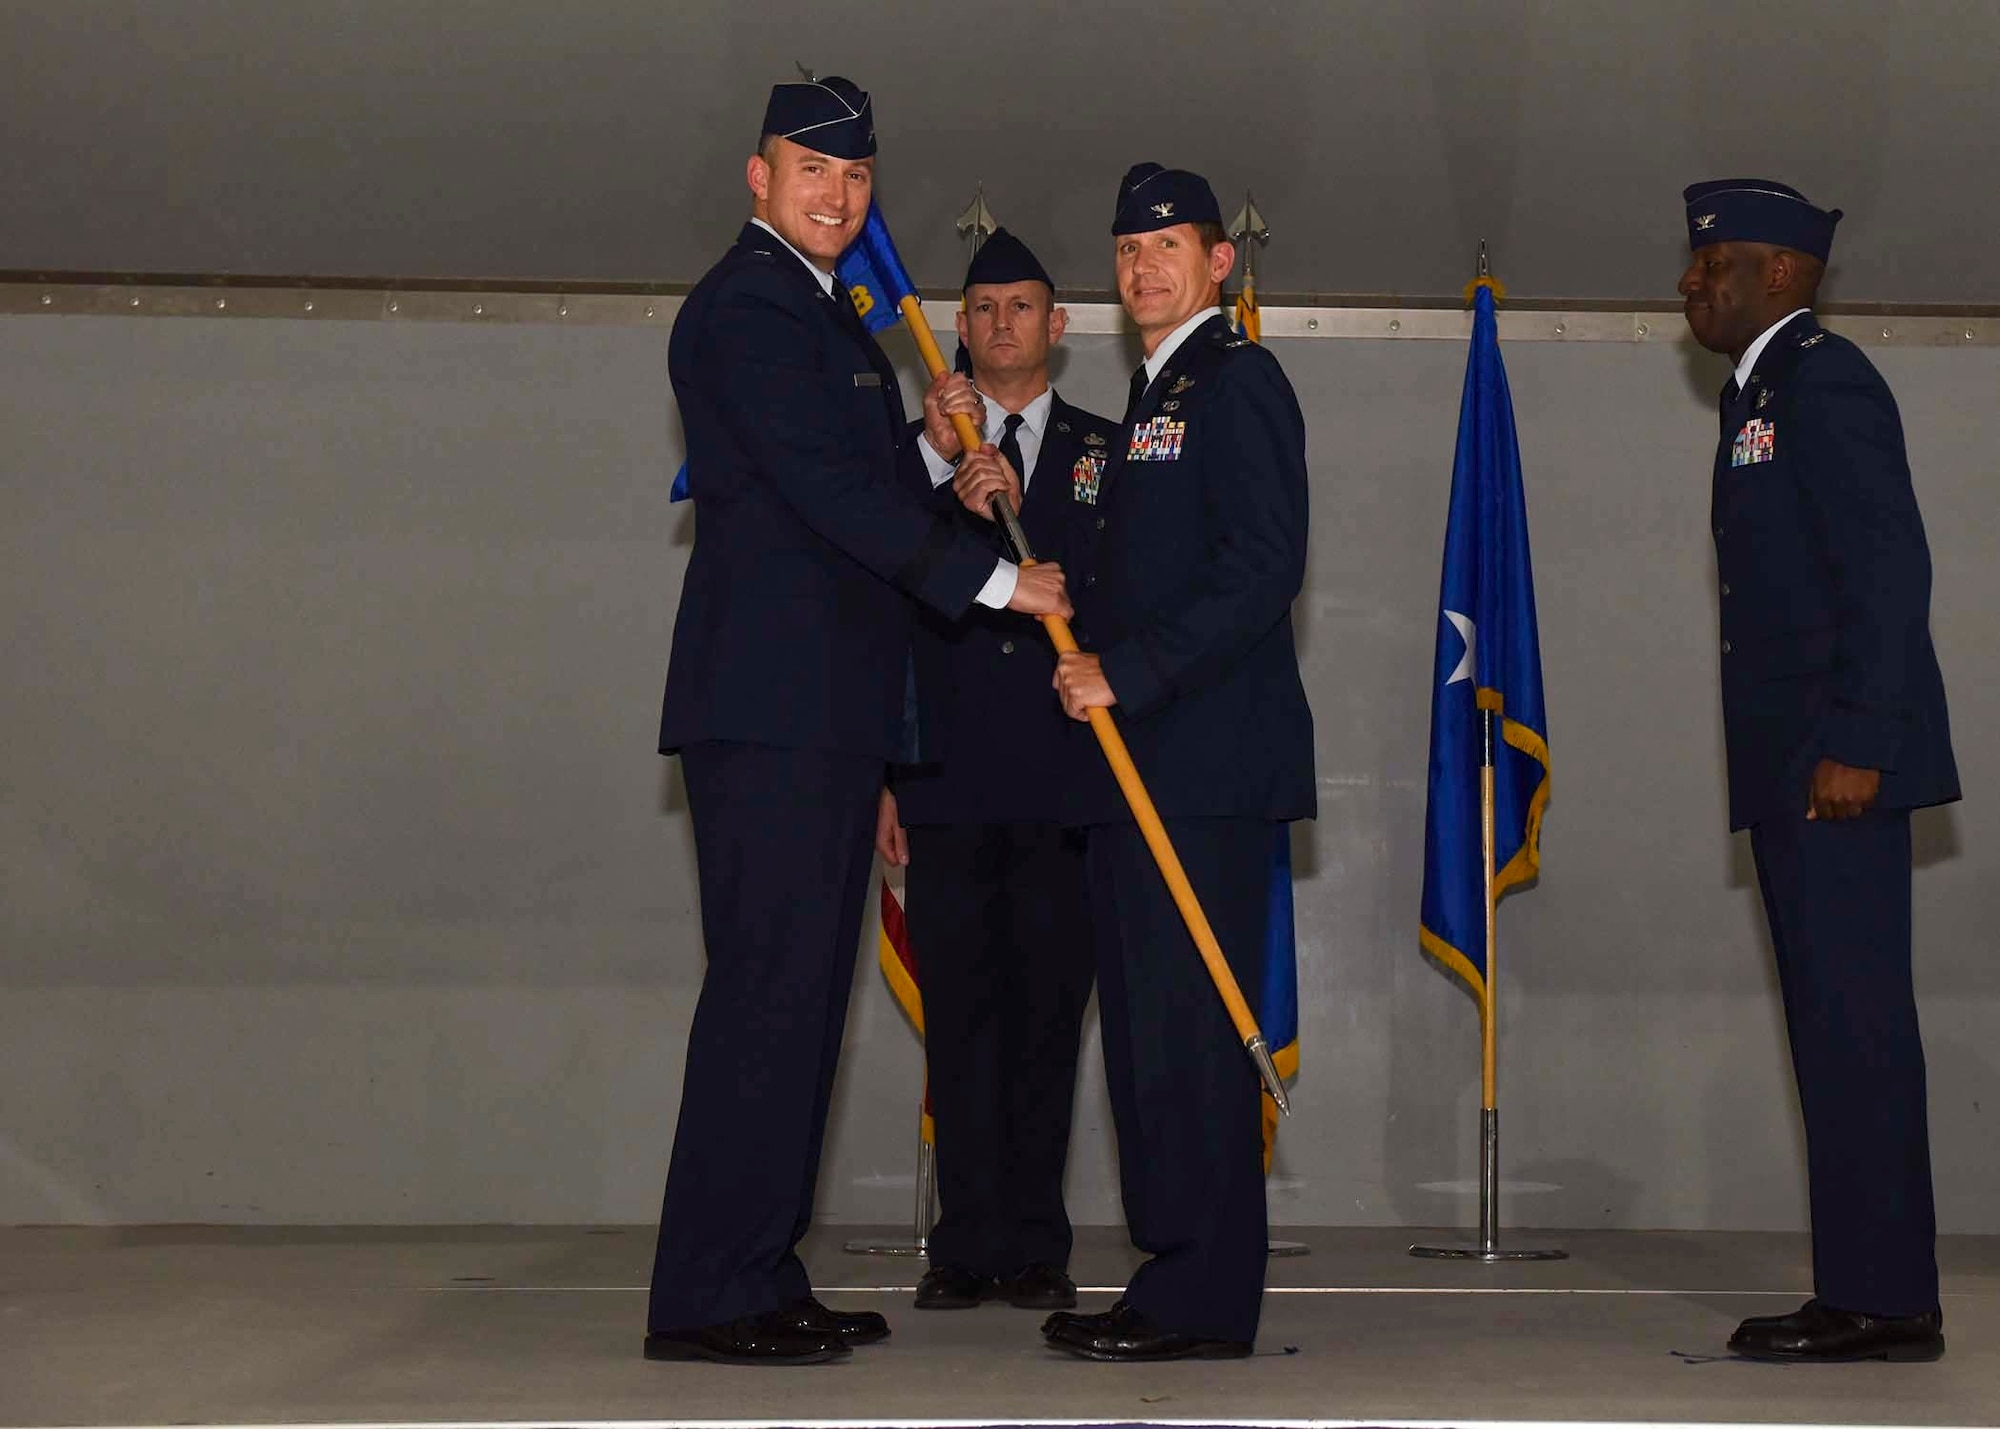 The 57th Wing commander passes the guide on to the new 57th Adversary Tactics Group commander.